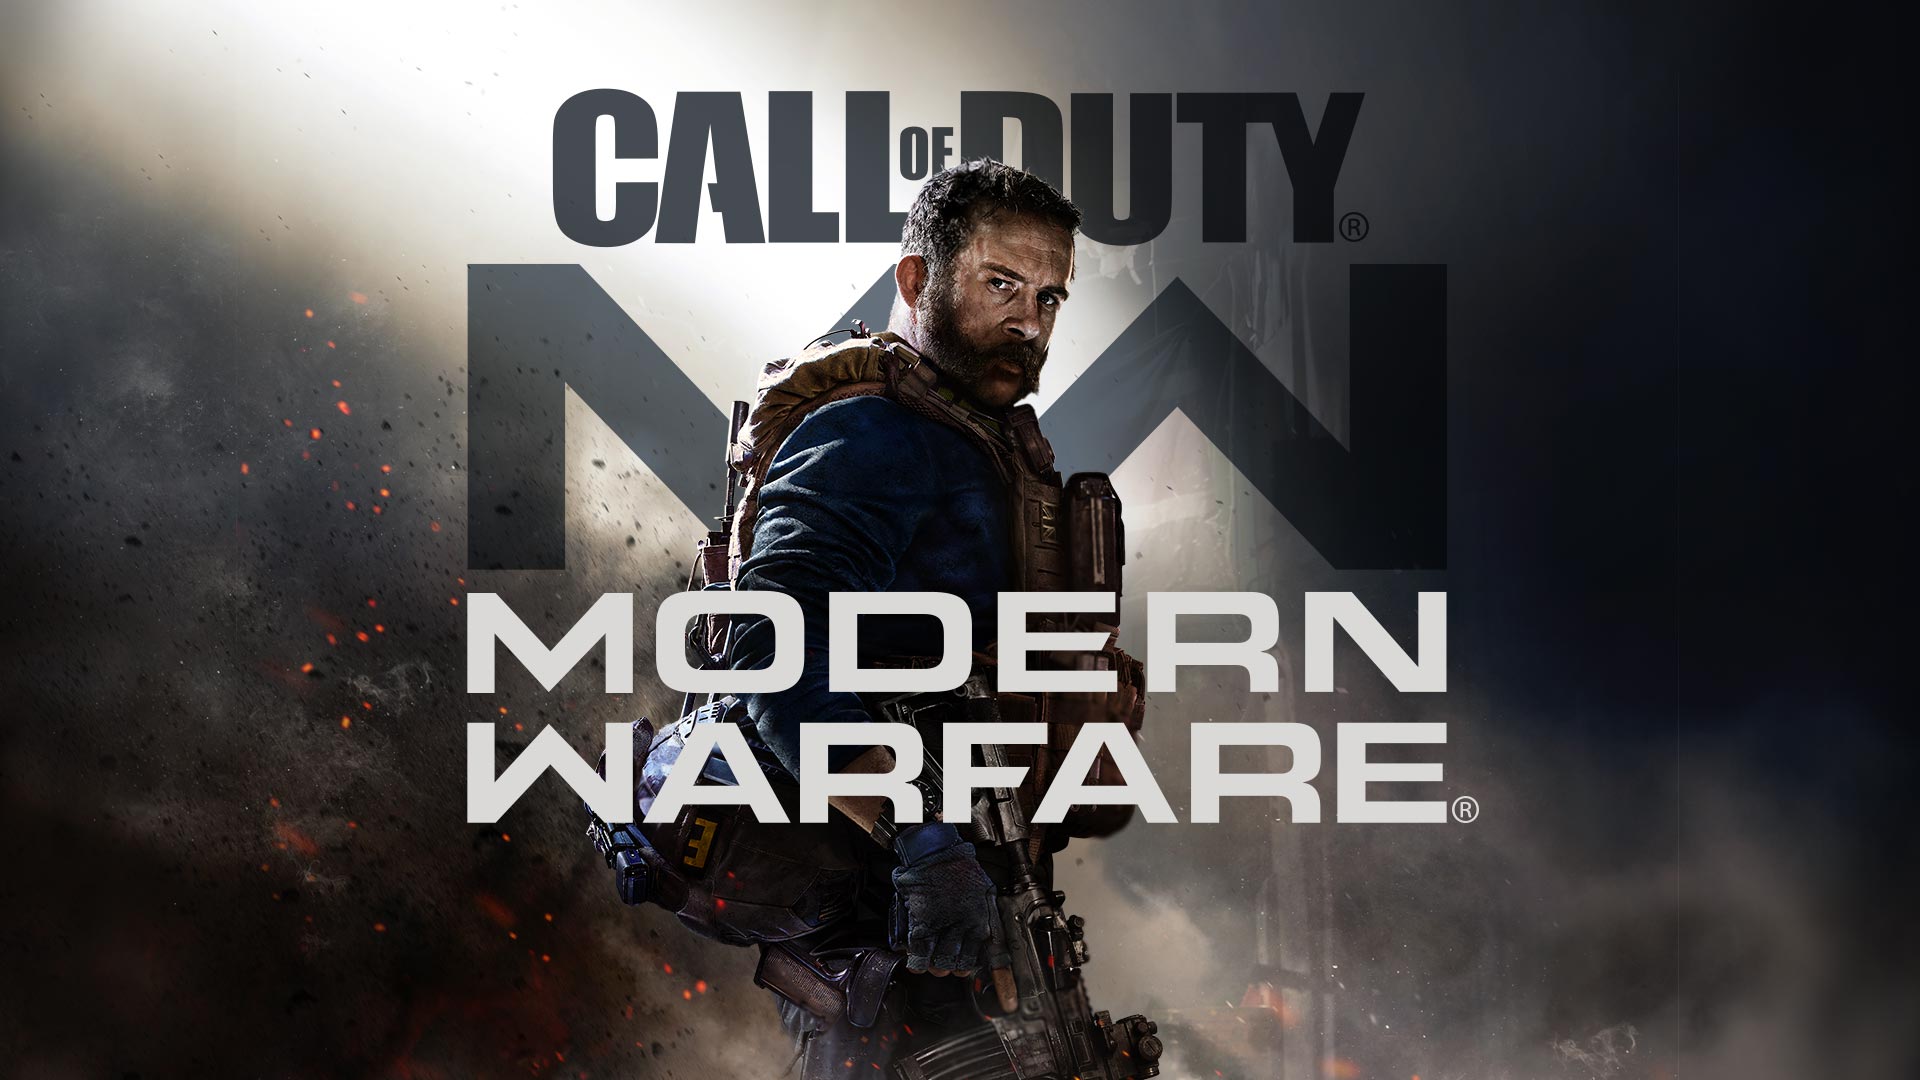  What is the new release date for Modern Warfare Season 4 and Call of Duty: Mobile Season 7? 